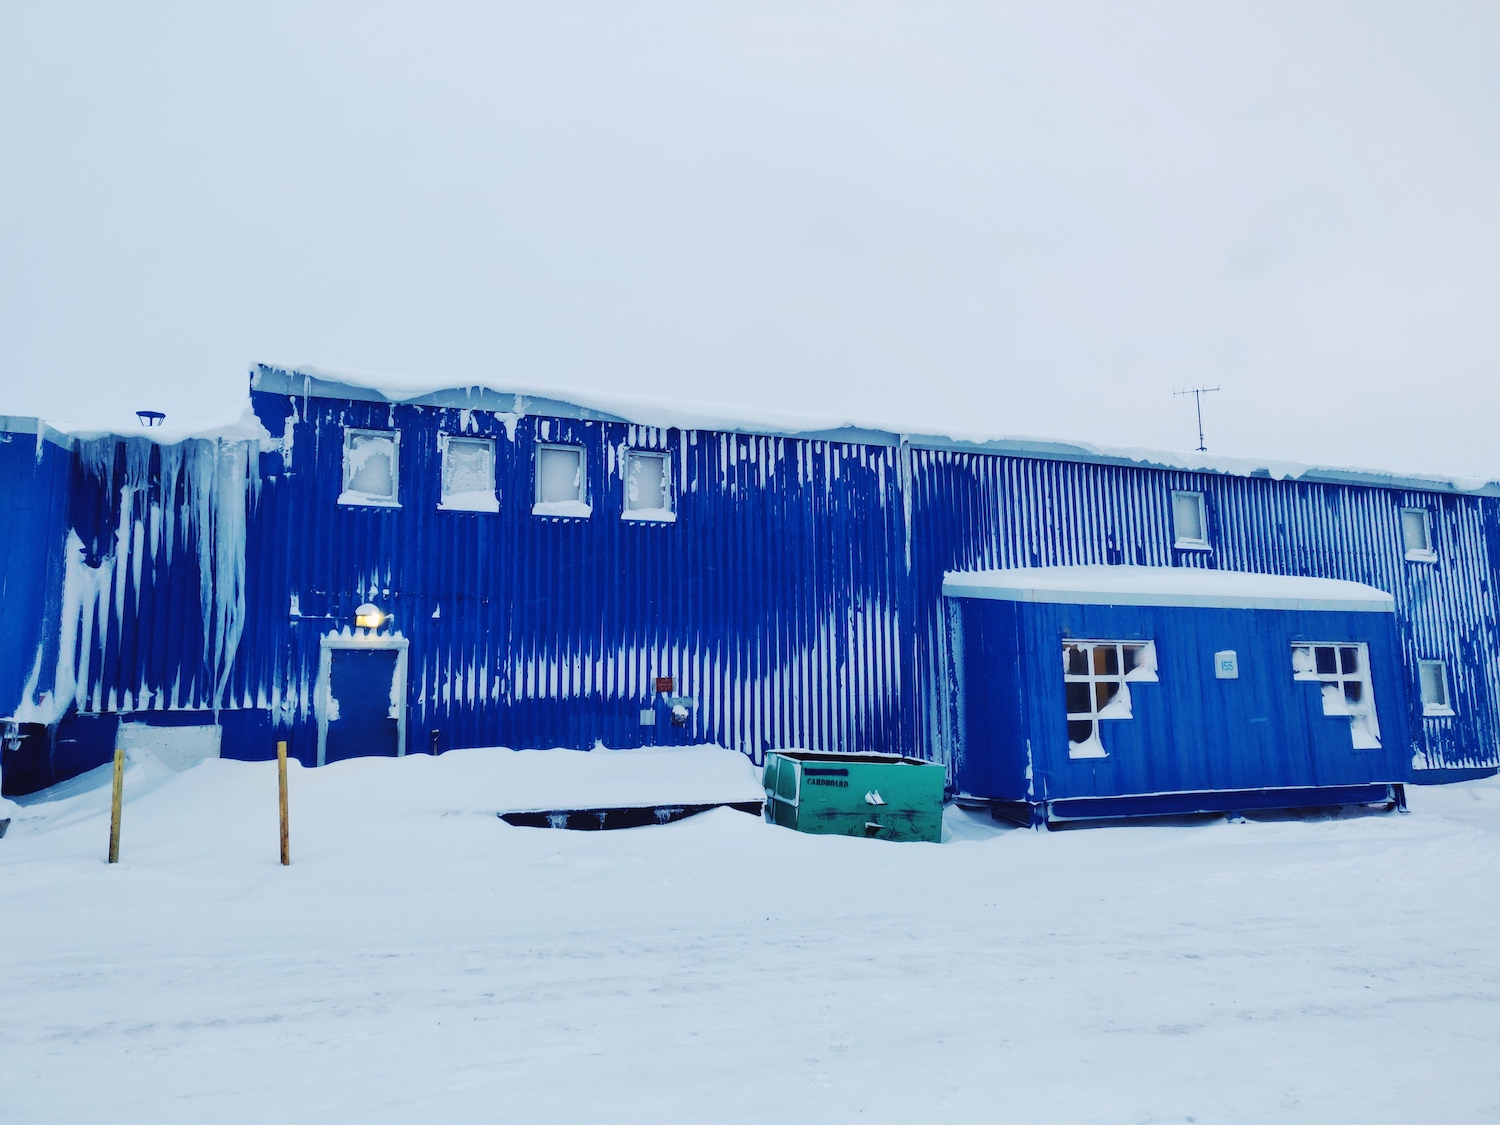 The central, blue Building 155 at McMurdo Station